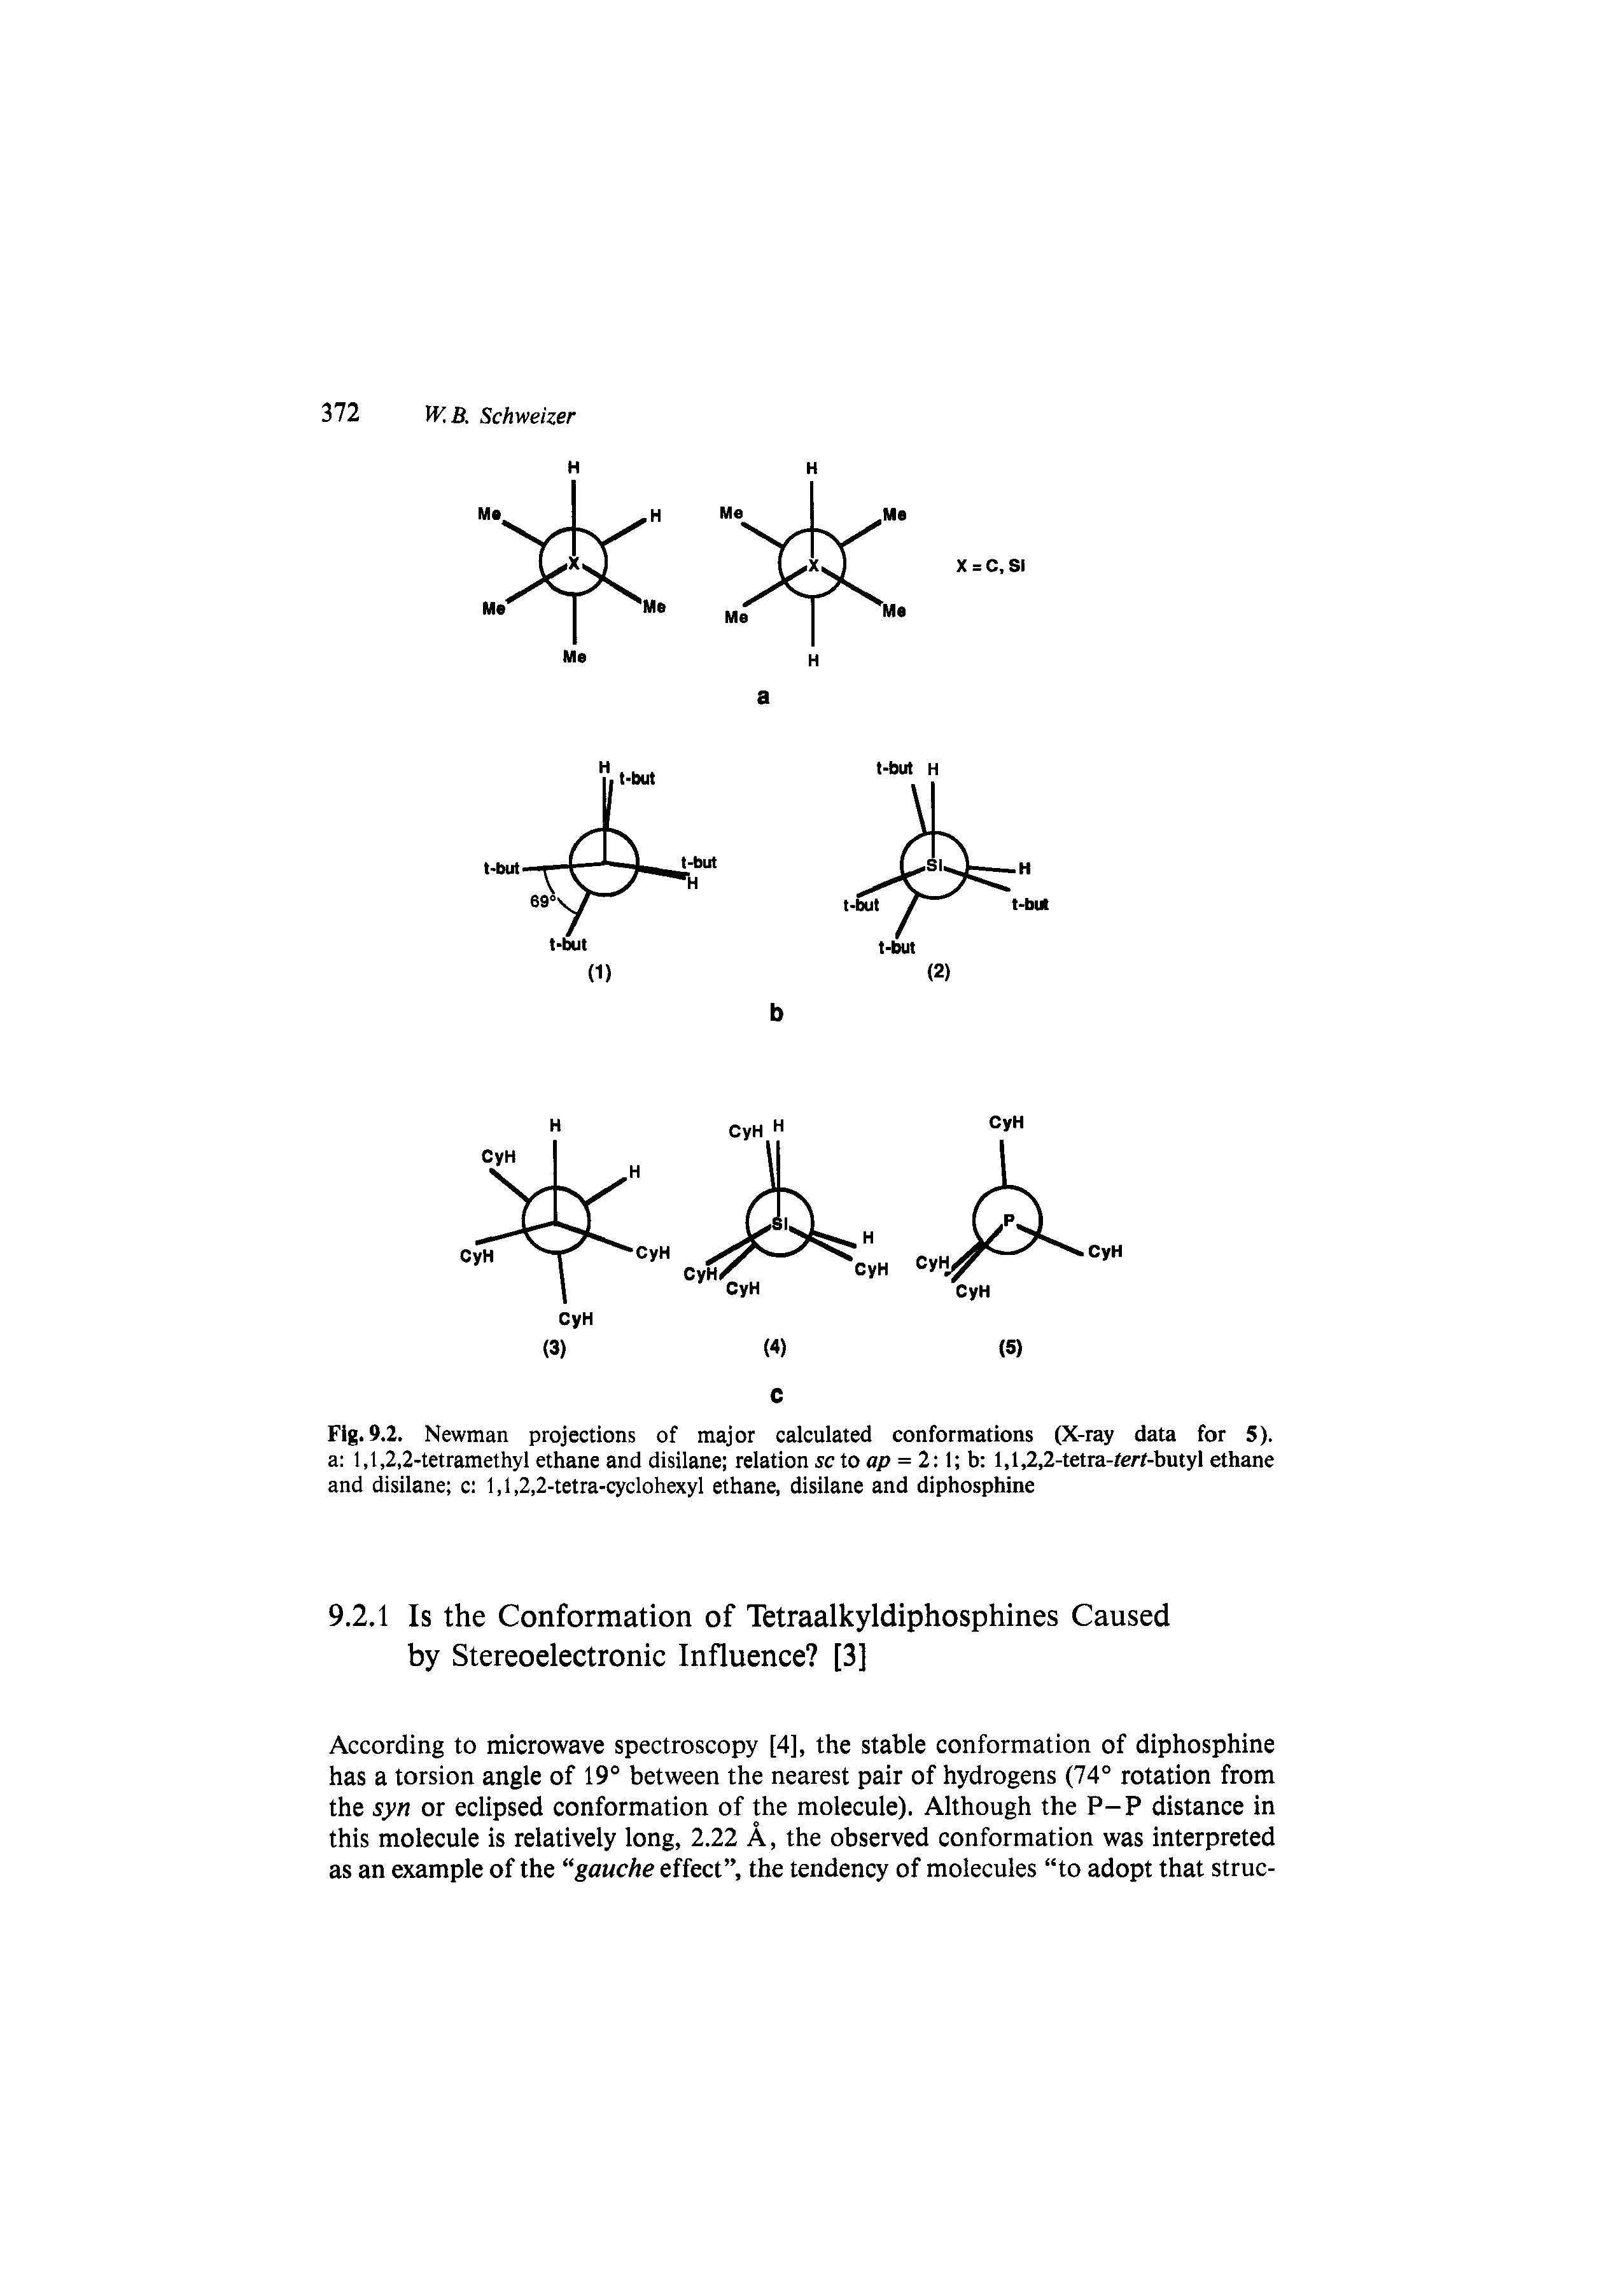 Fig. 9.2. Newman projections of major calculated conformations (X-ray data for 5). a 1,1,2,2-tetramethyl ethane and disilane relation sc to p = 2 1 b 1,1,2,2-tetra-rert-butyl ethane and disilane c 1,1,2,2-tetra-cyclohexyl ethane, disilane and diphosphine...